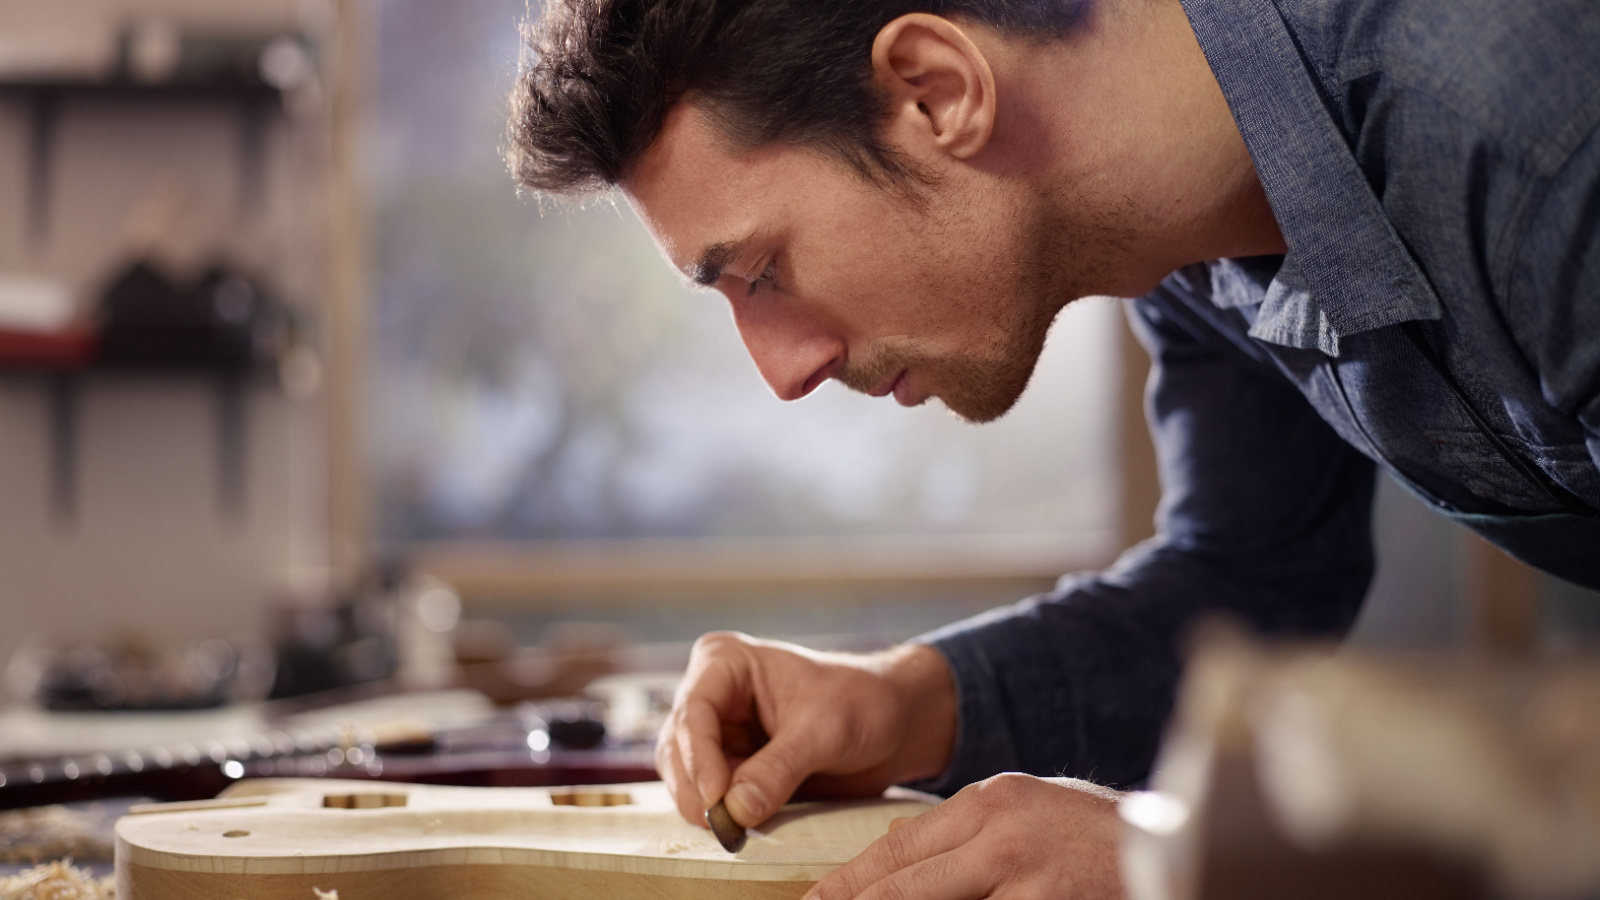 image credit: Diego Cervo/shutterstock <p>Once the standard for reliability, ‘Craftsman’ now confronts criticism over its quality. This decline mirrors broader issues in manufacturing, where brand legacy faces challenges from cost-cutting and outsourcing, prompting discussions about the balance between quality and profitability.</p>